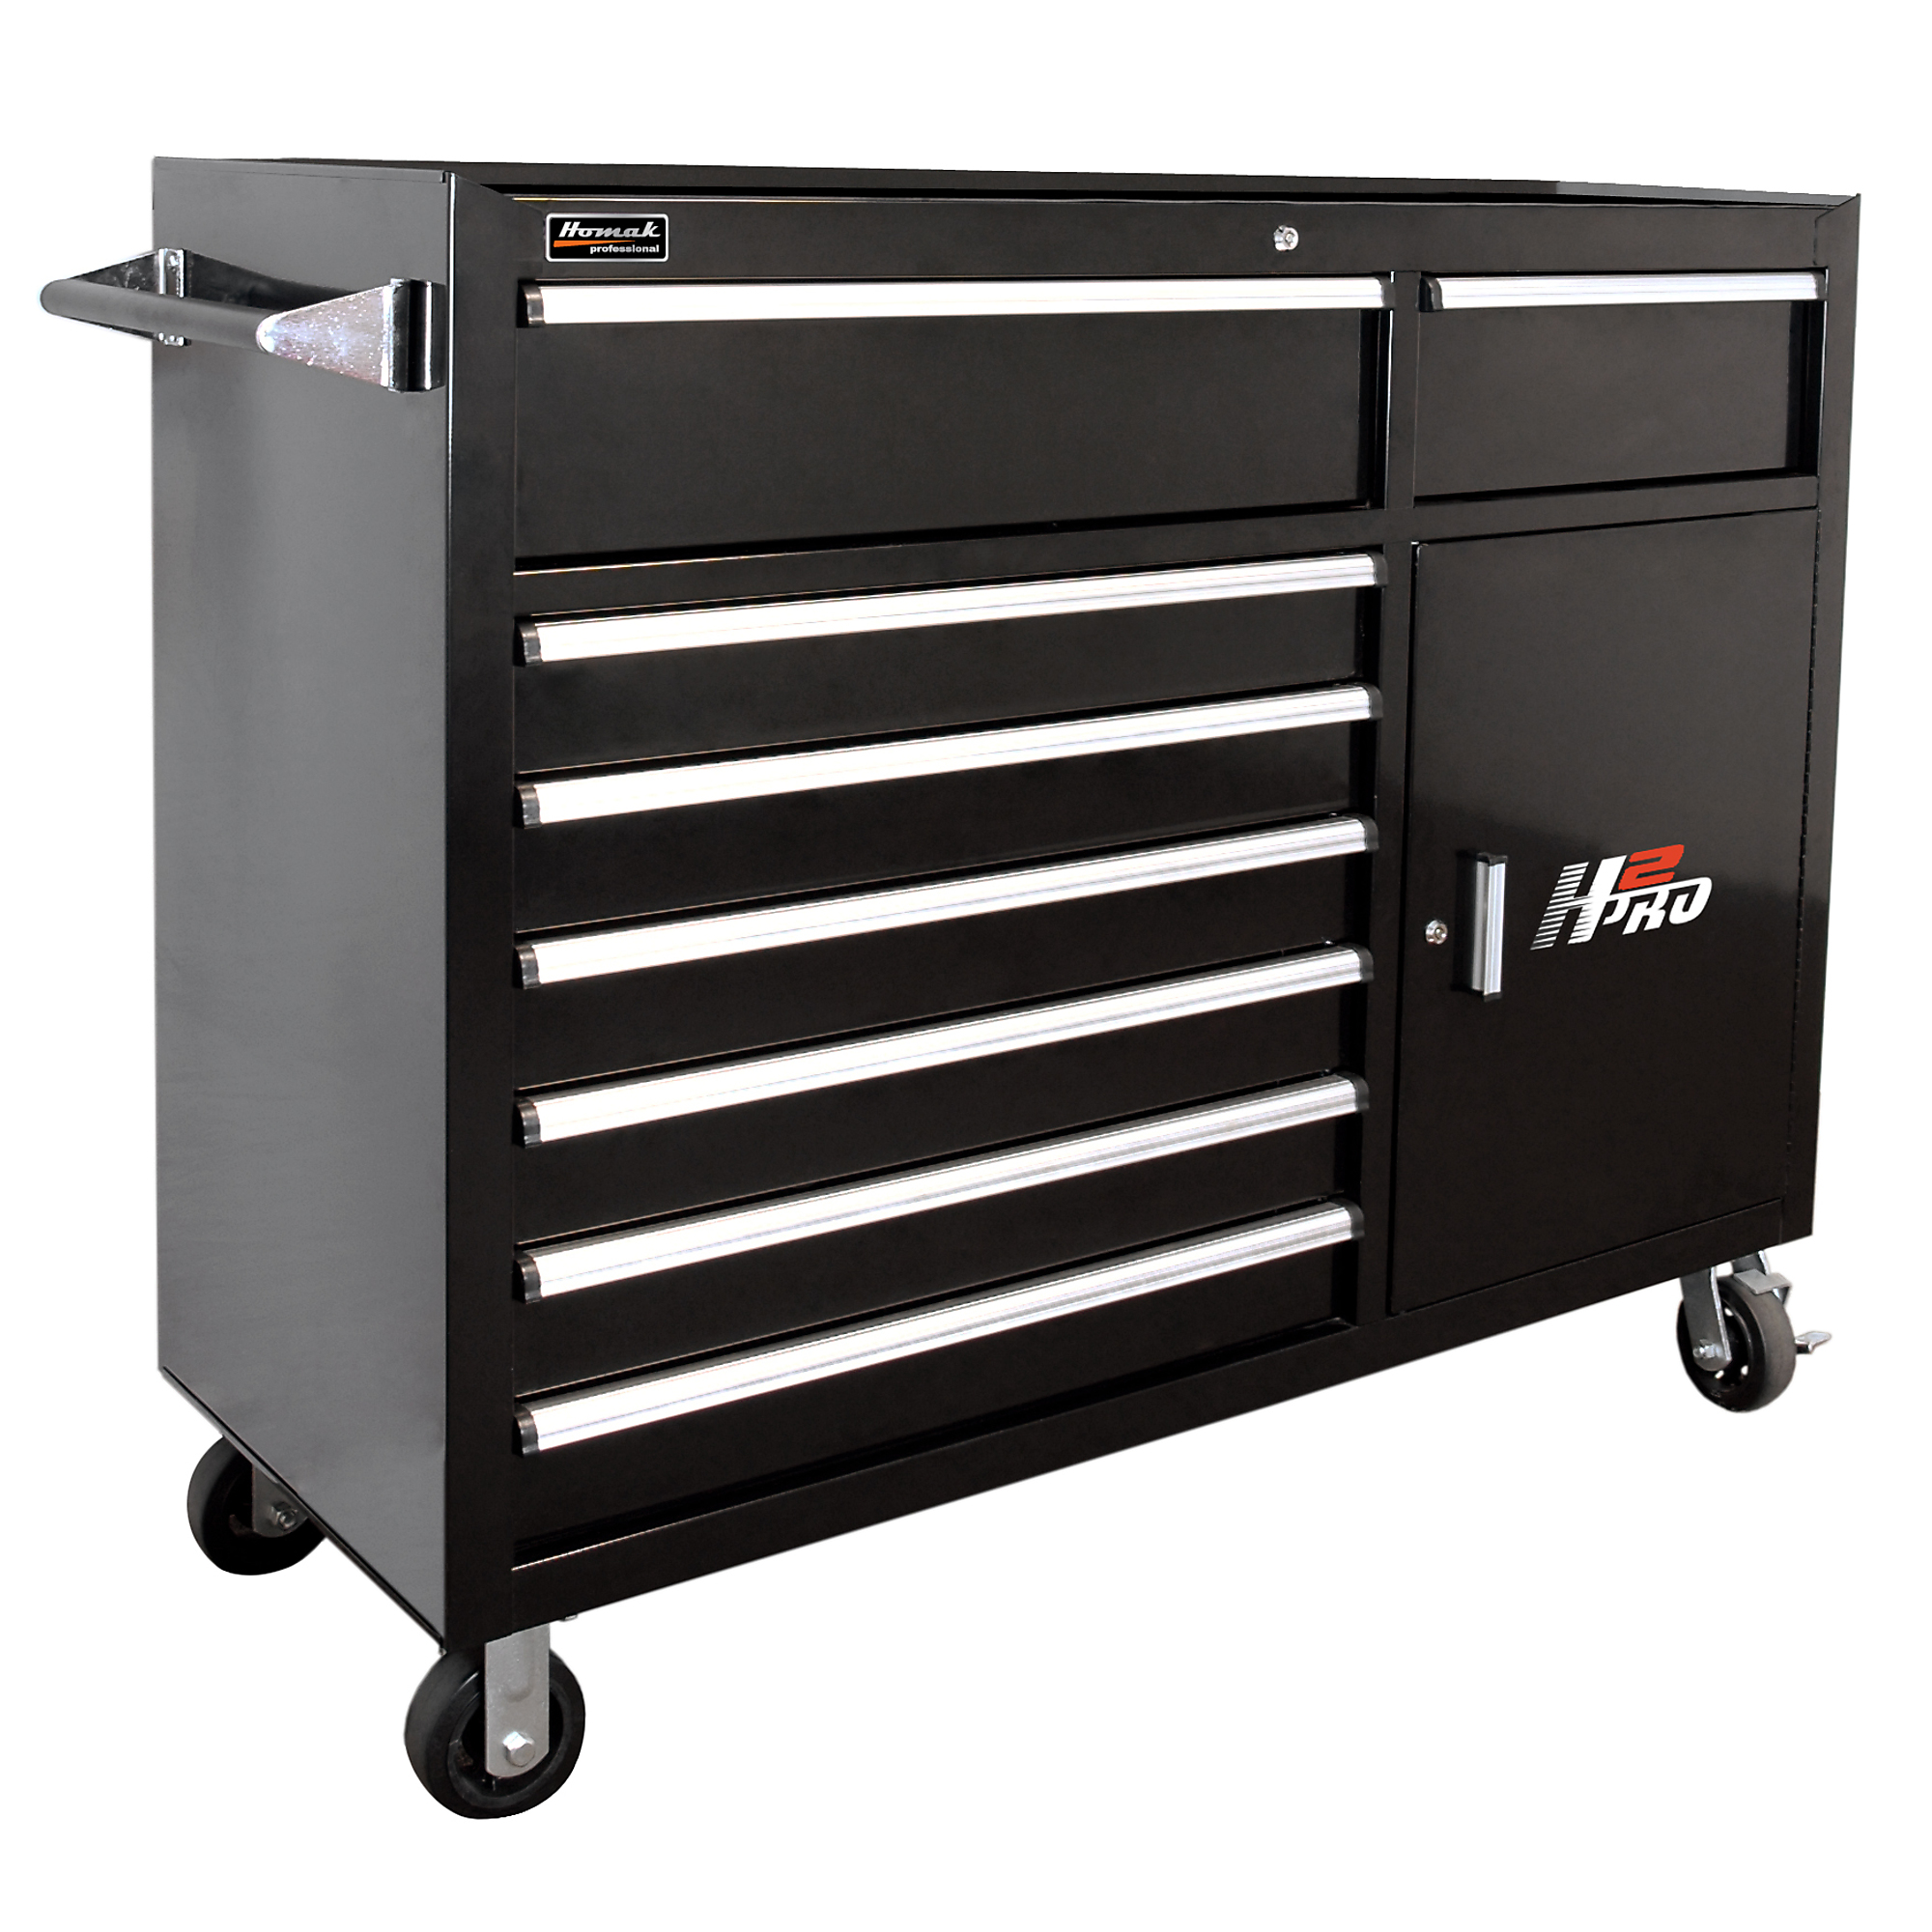 H2PRO 56Inch 8-Drawer Roller Tool Cabinet — With 2 Compartment Drawers, Black, 56 1/4Inch W x 22 7/8Inch D x 45 3/4Inch H, Model - Homak BK04056082